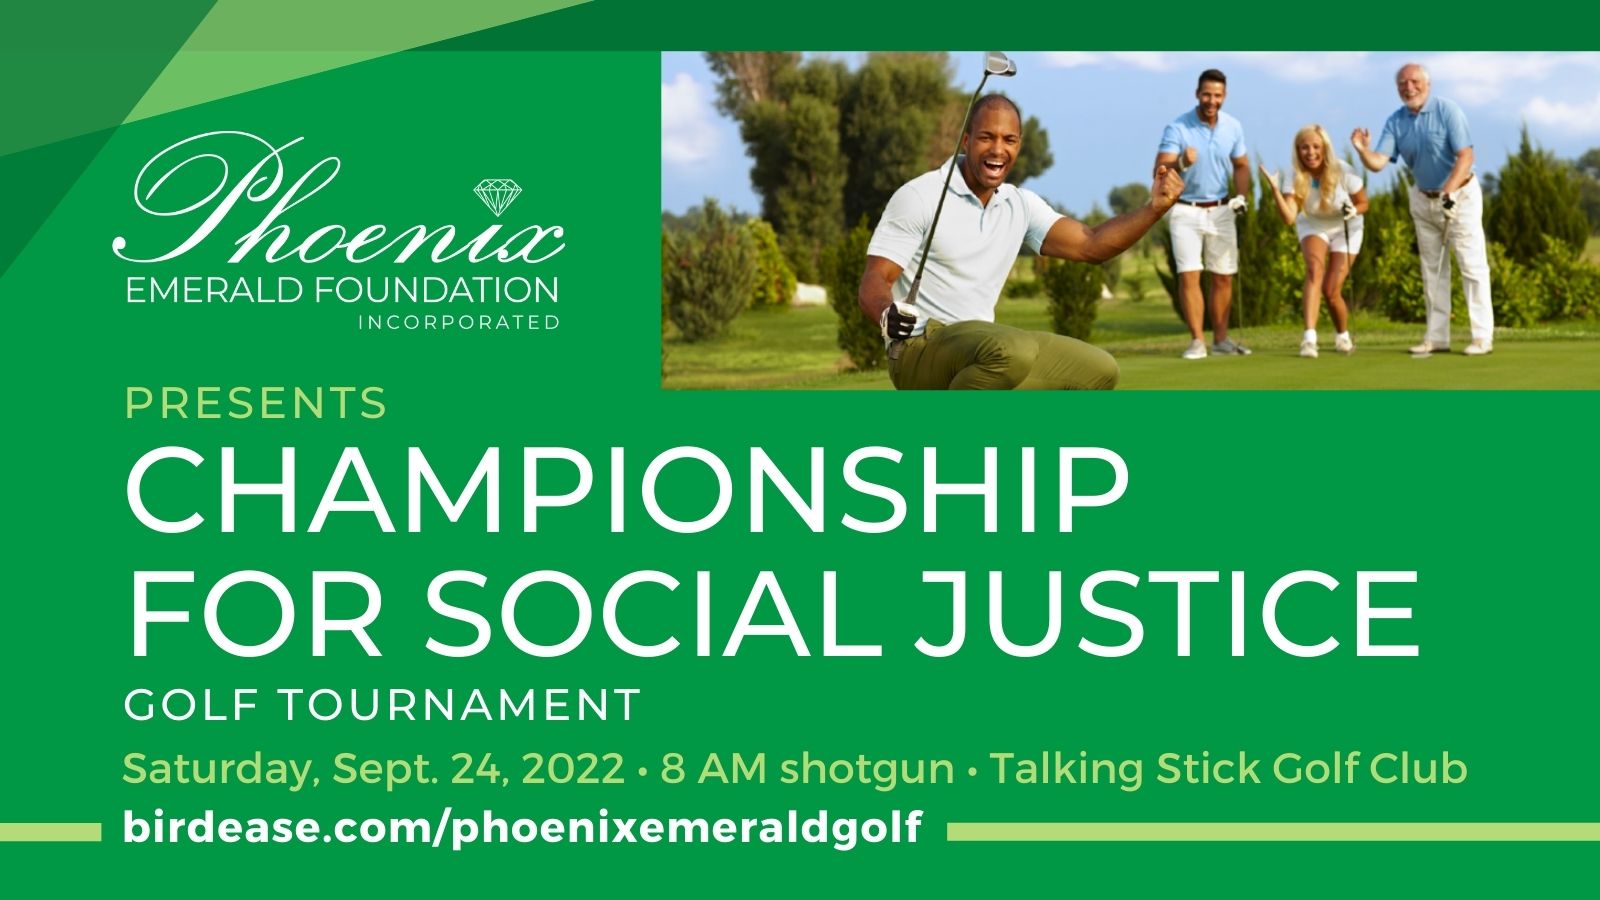 Phoenix Emerald Foundation Presents Championship for Social Justice Golf Tournament Fundraiser on September 24